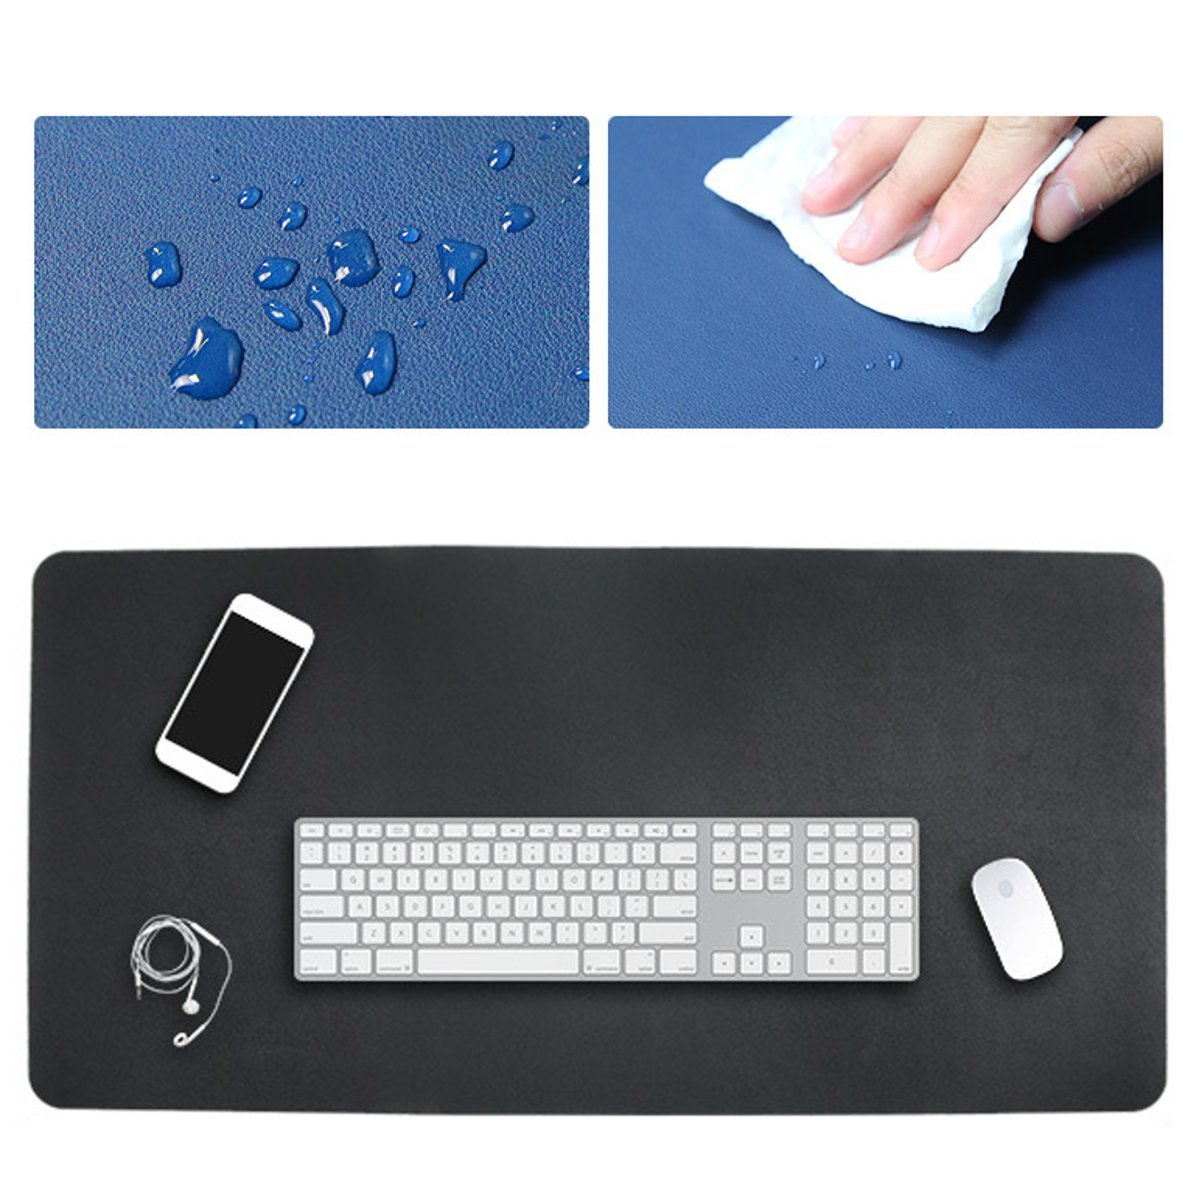 80x40cm Both Sides Two Colors Extended PU leather Mouse Pad Mat Large Office Gaming Desk Mat 1